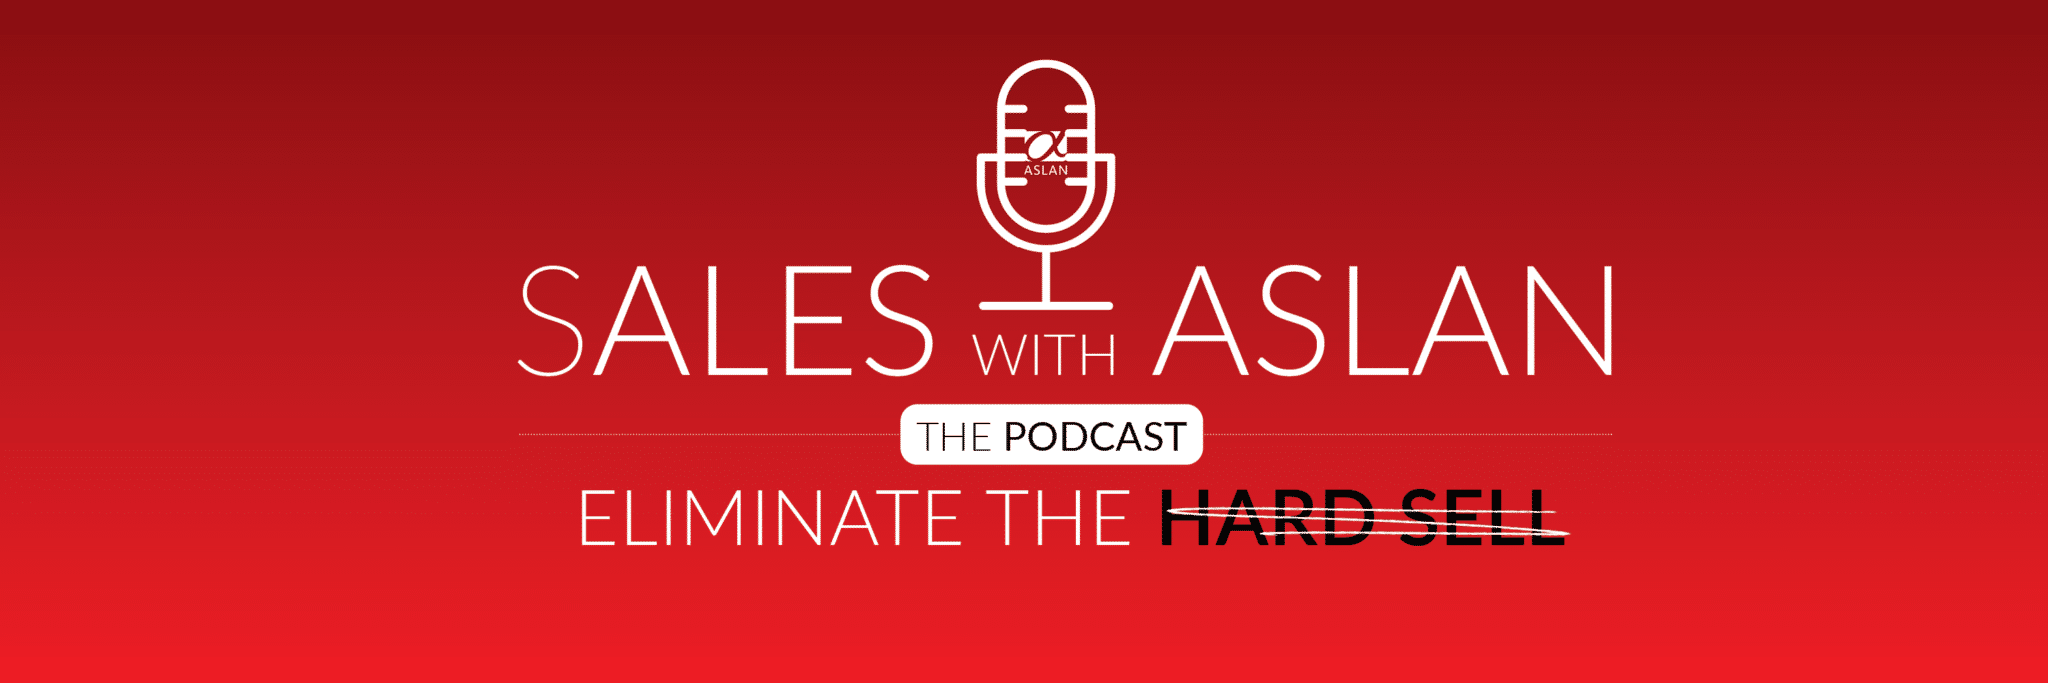 In this episode, Tom and Tab continue their discussion from last episode with Andy Paul – sales expert, author, and host of his own podcast, Sales Enablement with Andy Paul.  The next part of their discussion moves on to tackle: the four pillars that drive success, the value of curiosity, intellectual humility, and the nitty gritty tactics of what it takes to really be successful. Very few sellers can do what Andy is encouraging our listeners to do – but if you do, you will be different, you will make more money, you will be more successful, and you will enjoy your role as a seller even more.